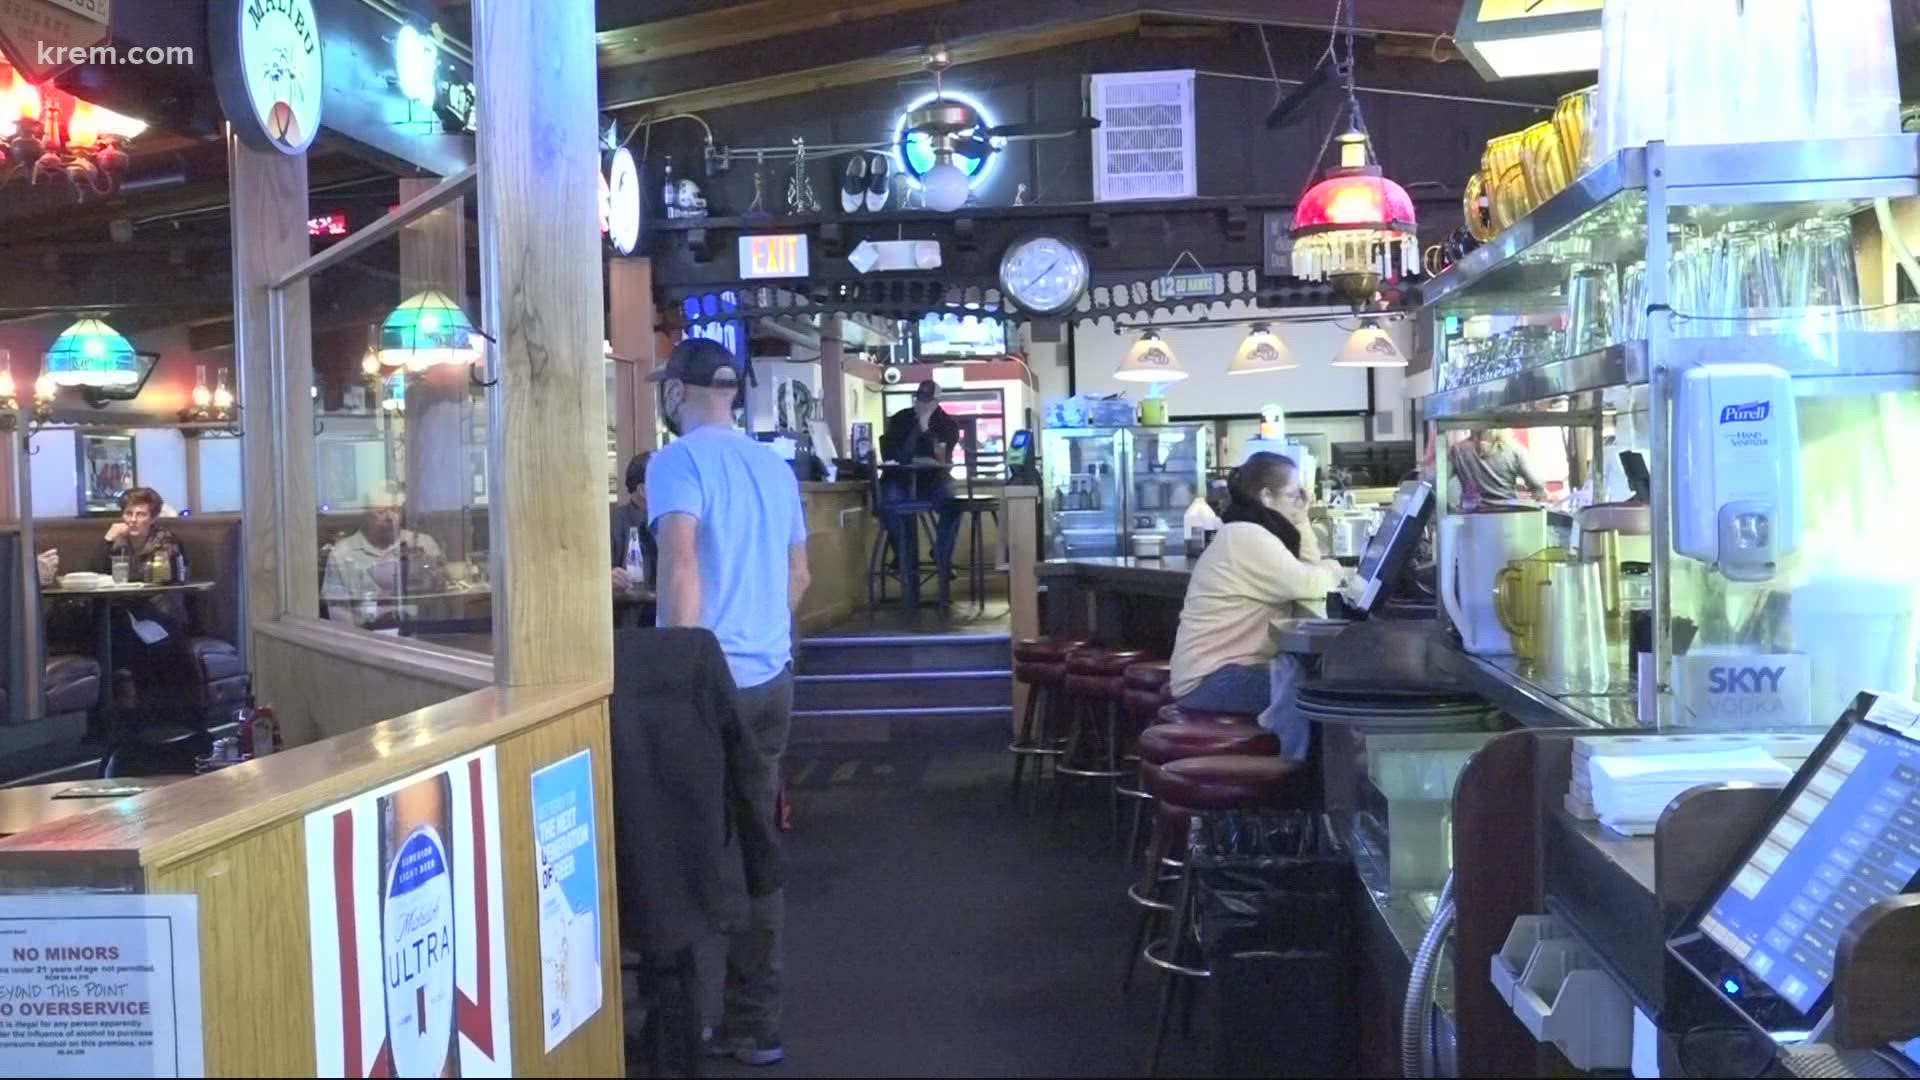 KREM 2 spoke with the owner of The Swinging Doors restaurant after she and other Spokane restaurants owners shared their business struggles with senator Cantwell.